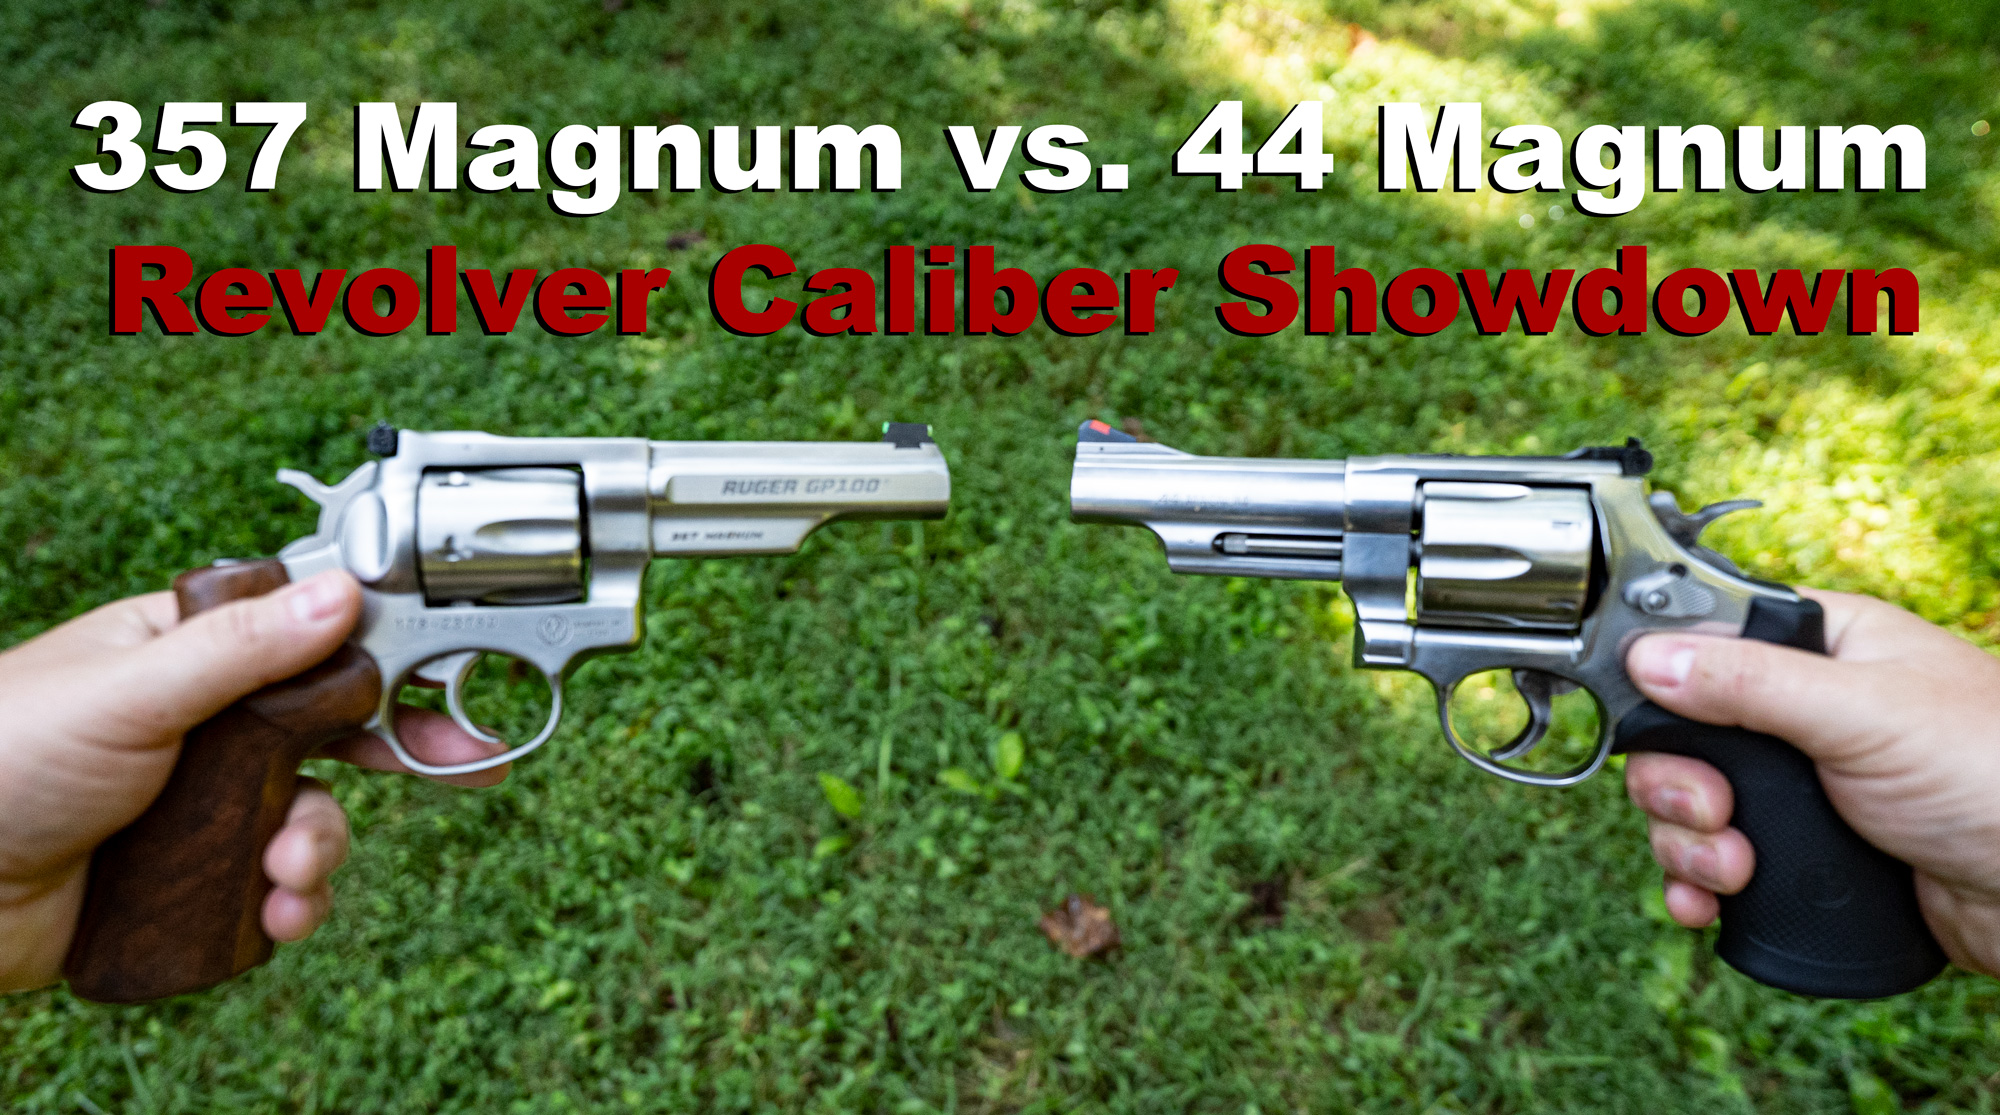 FOR THOSE WHO NEVER SAW THERE IS ONE DOWN ONE MAGNUM 357 /…